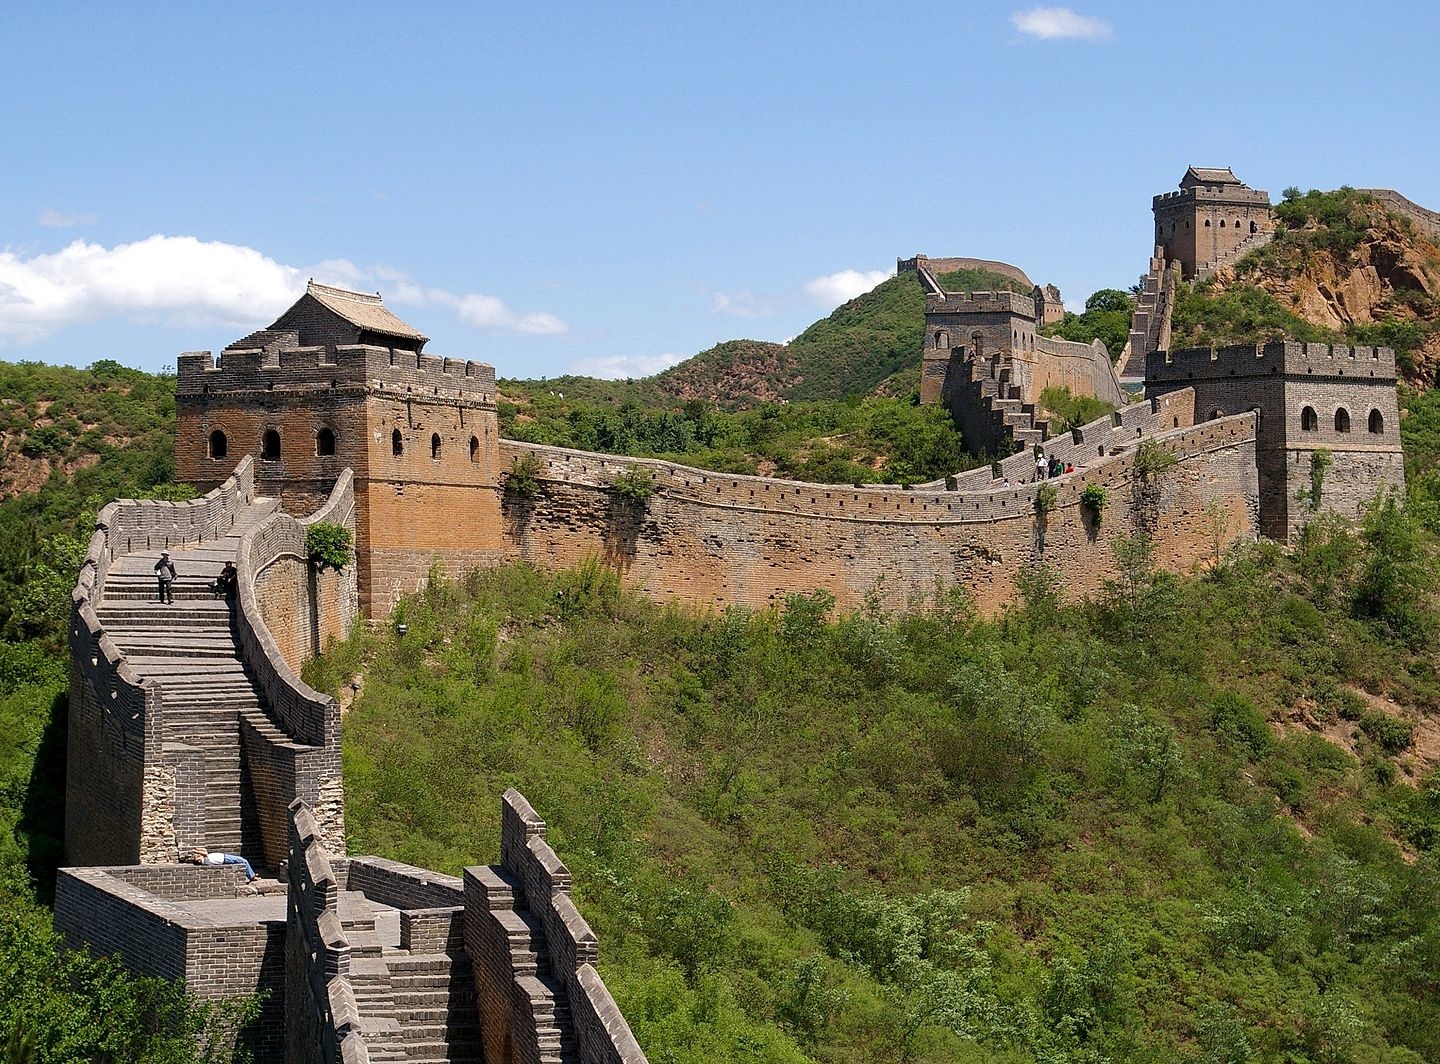 Airbnb Cancels Sleepover Event at the Great Wall